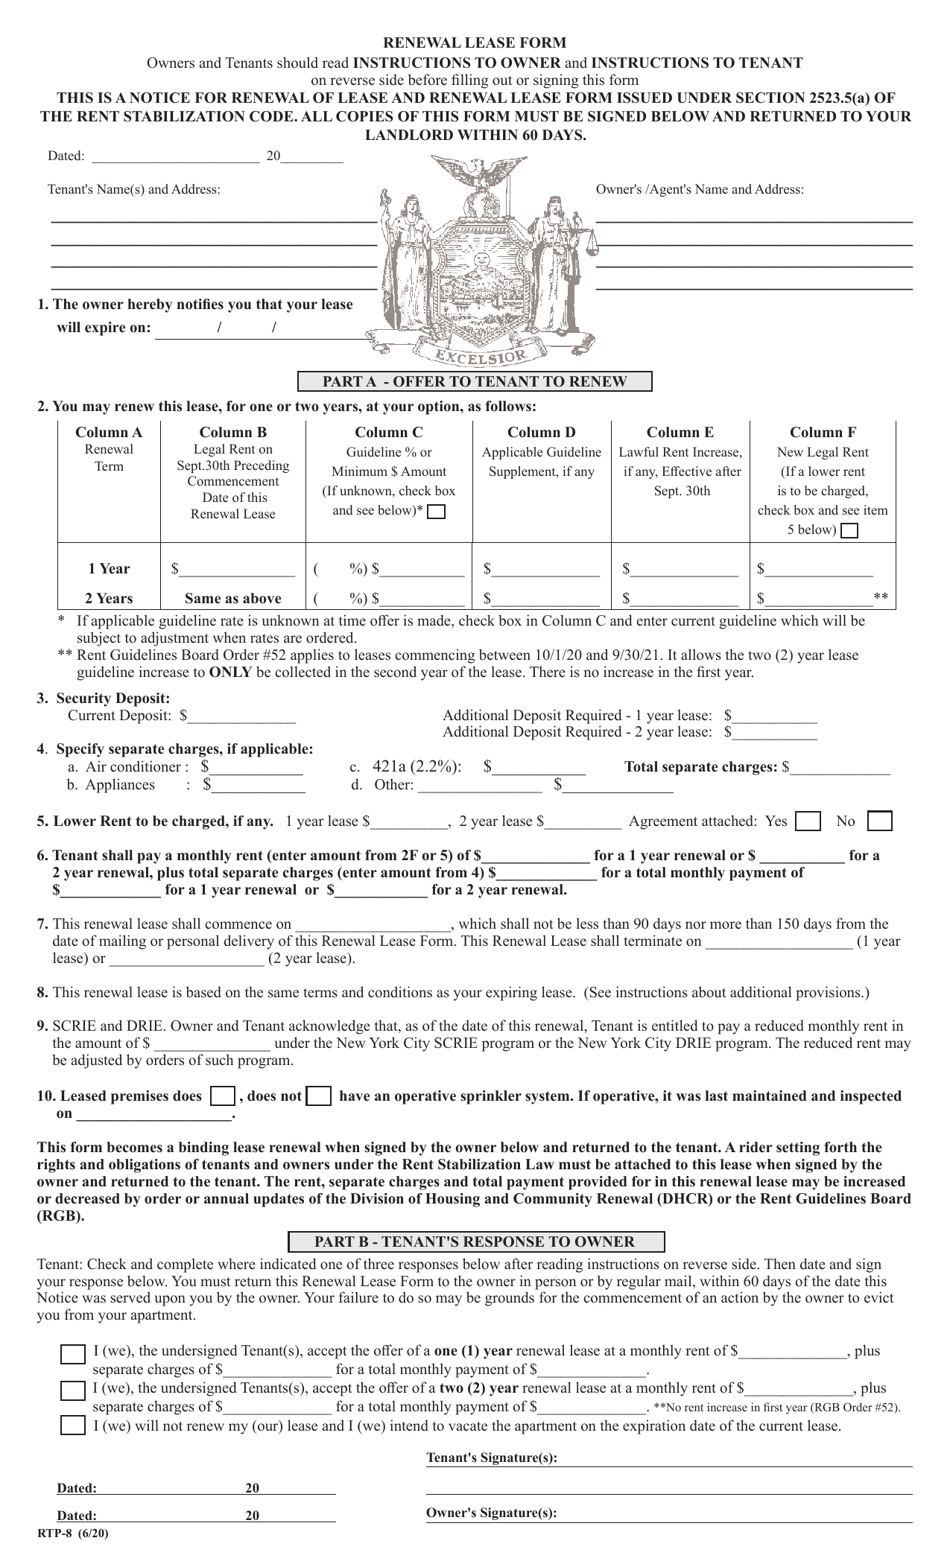 Form RTP-8 Renewal Lease Form - New York, Page 1